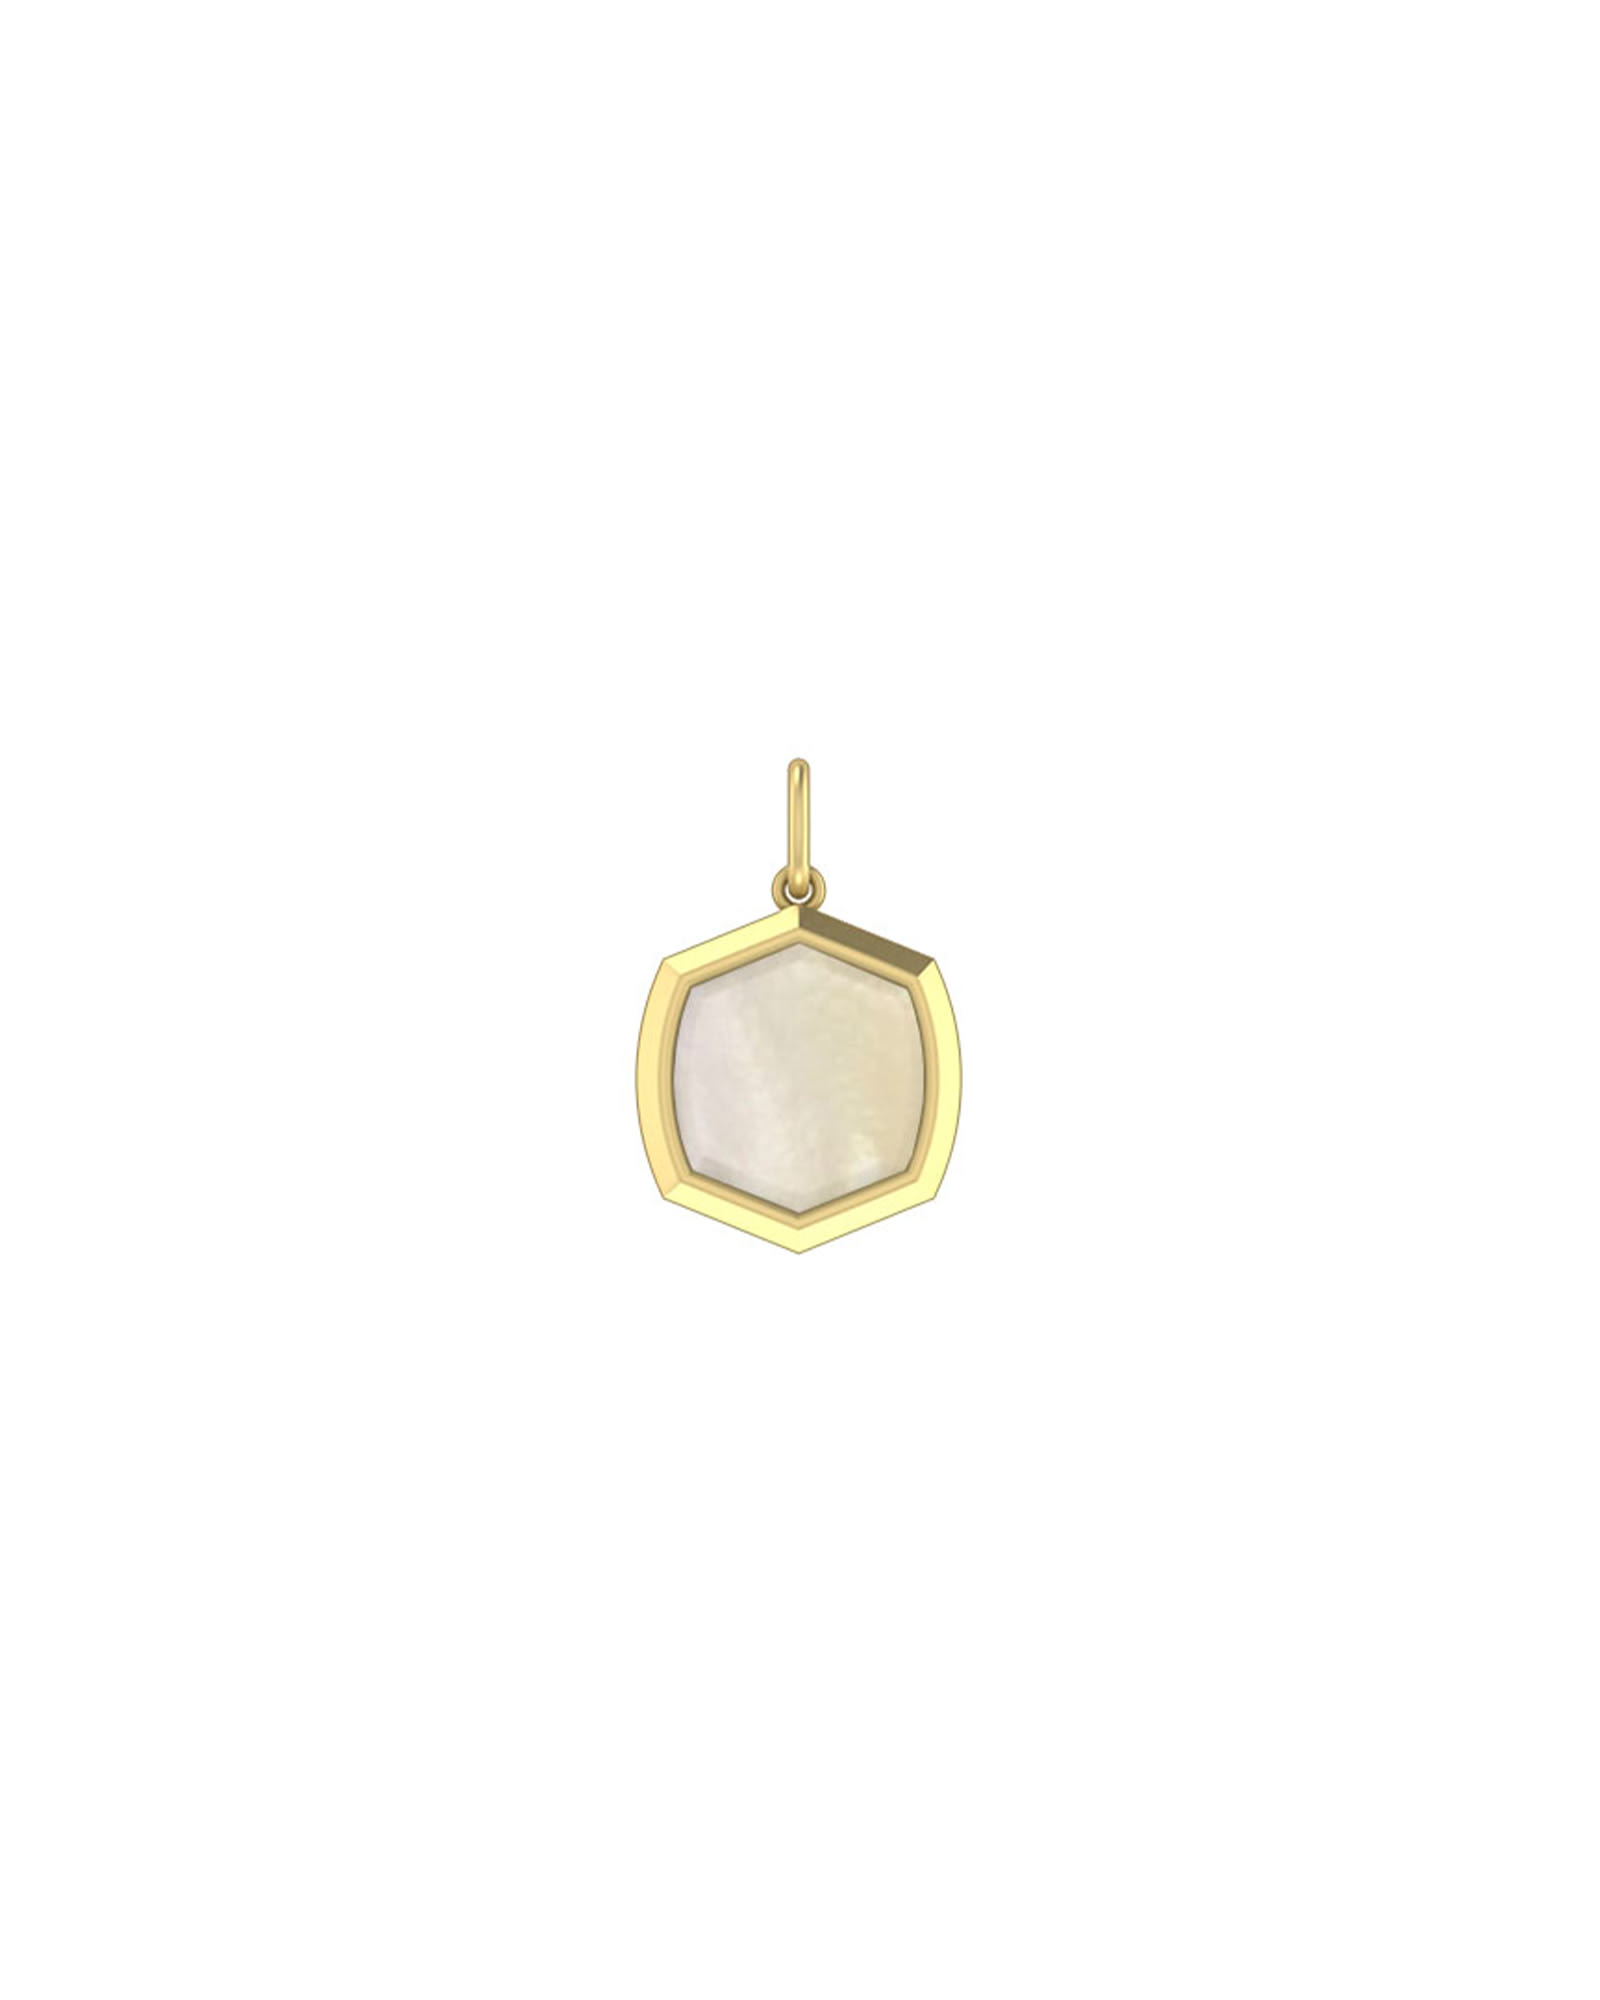 Davis 11mm 18k Gold Vermeil Stone Charm in Ivory Mother-of-Pearl